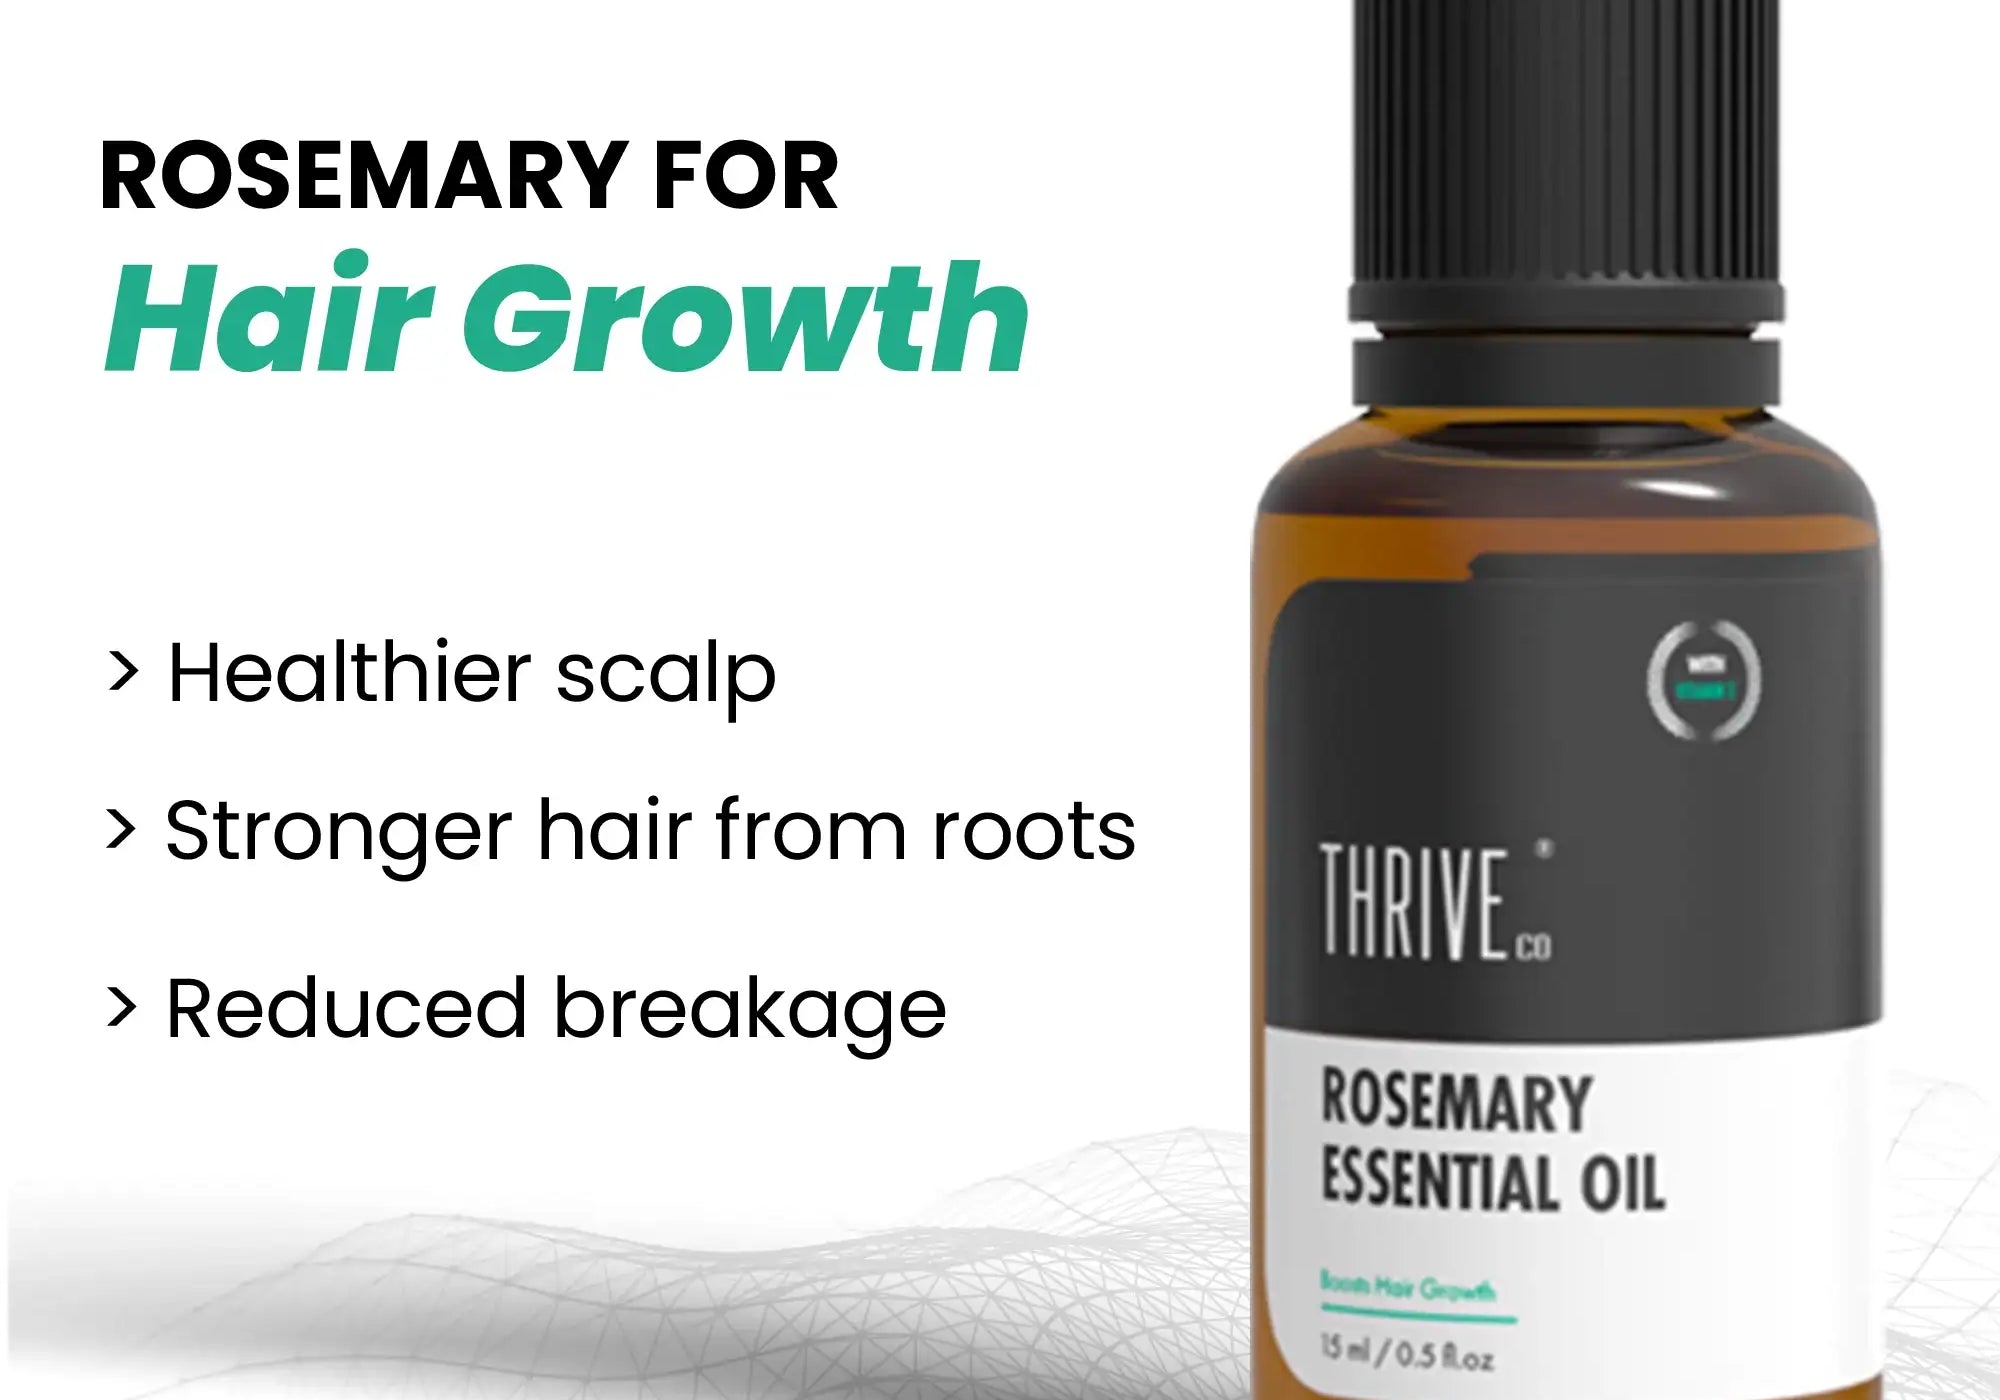 Detailed Review of ThriveCo Rosemary Essential Oil